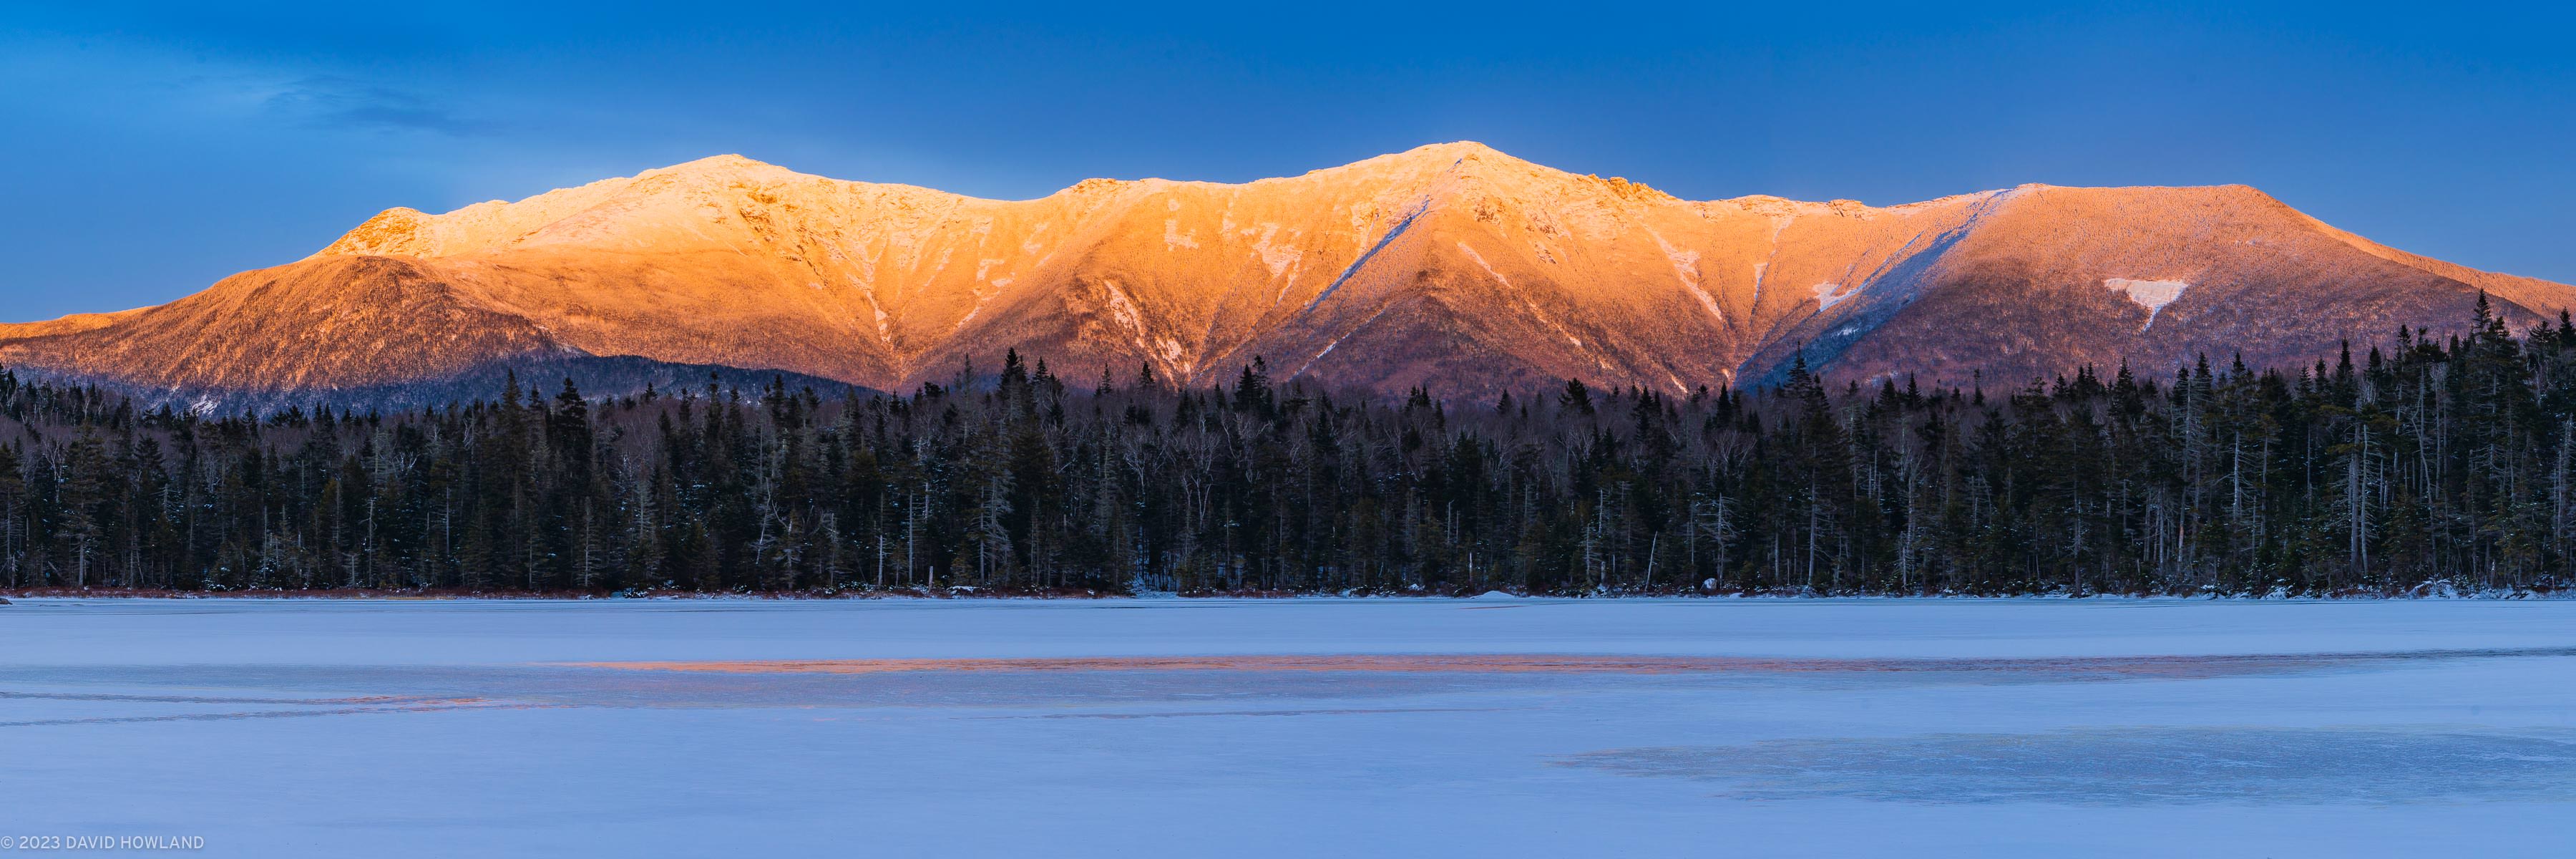 A panorama photo of the snow-covered peaks of Franconia Ridge glowing orange with alpenglow over the frozen surface of Lonesome Lake